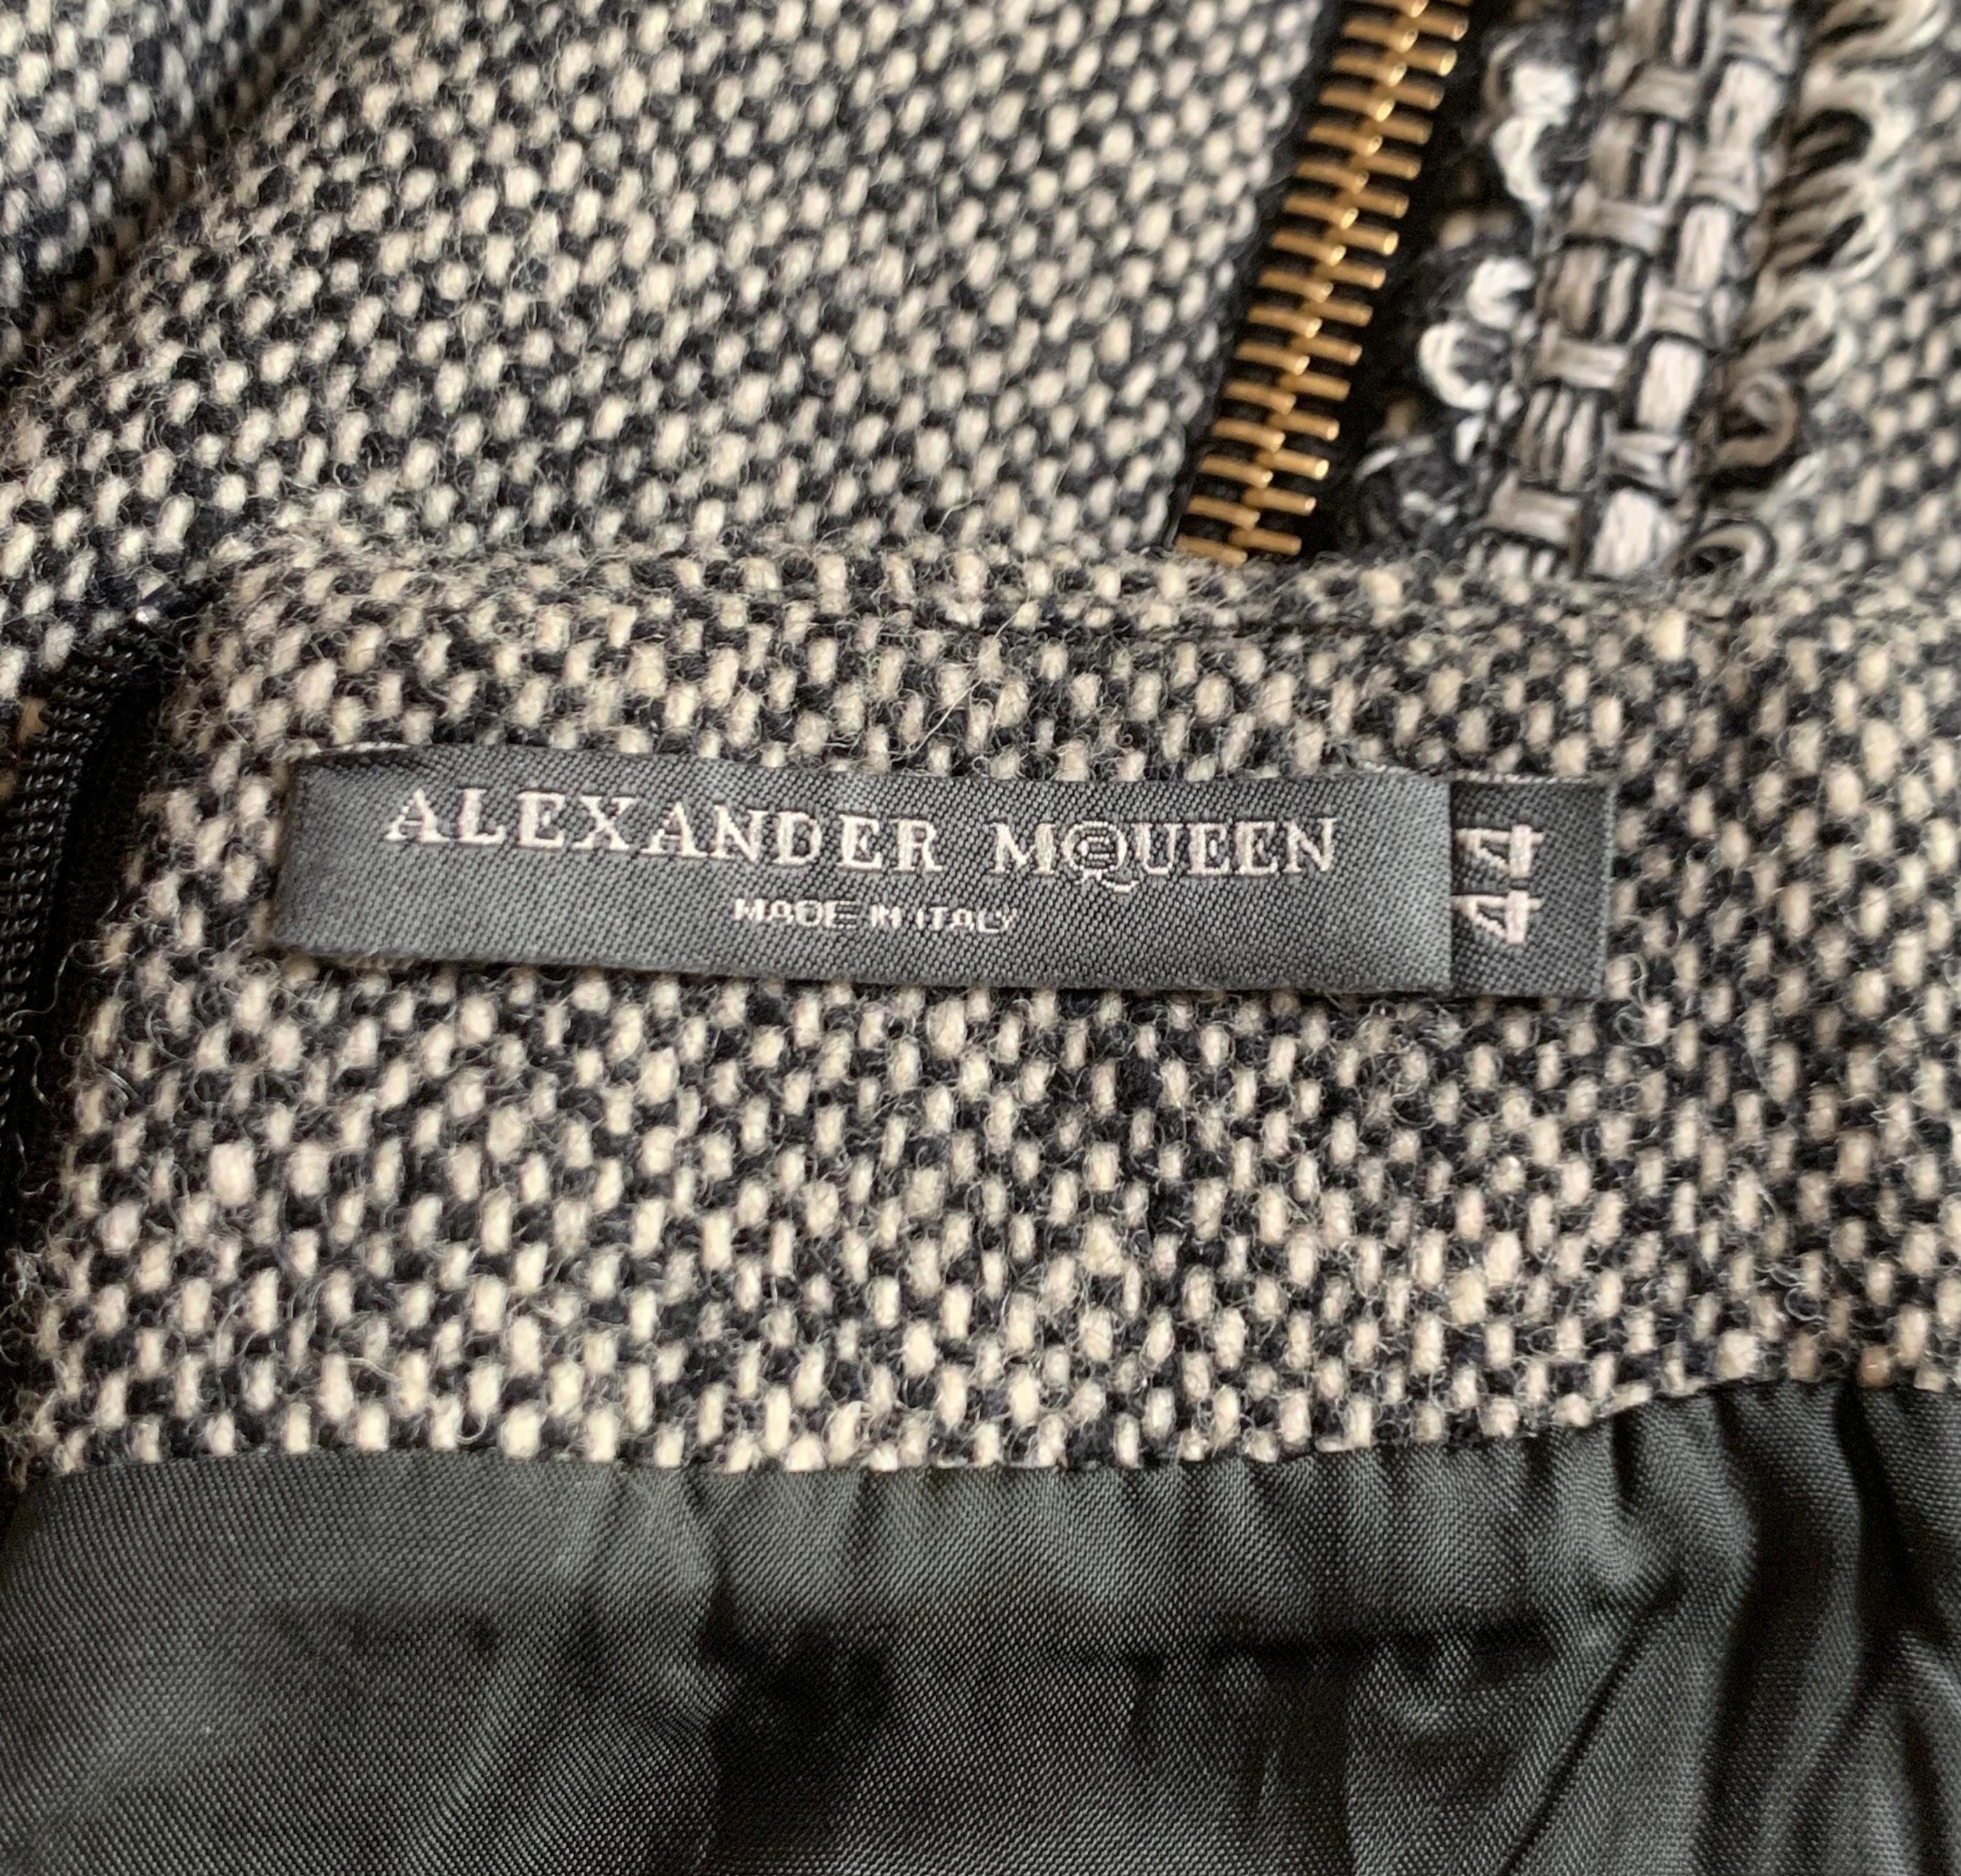 Alexander McQueen 2003 Zipper Detail Pencil Skirt in Black and White Tweed For Sale 1